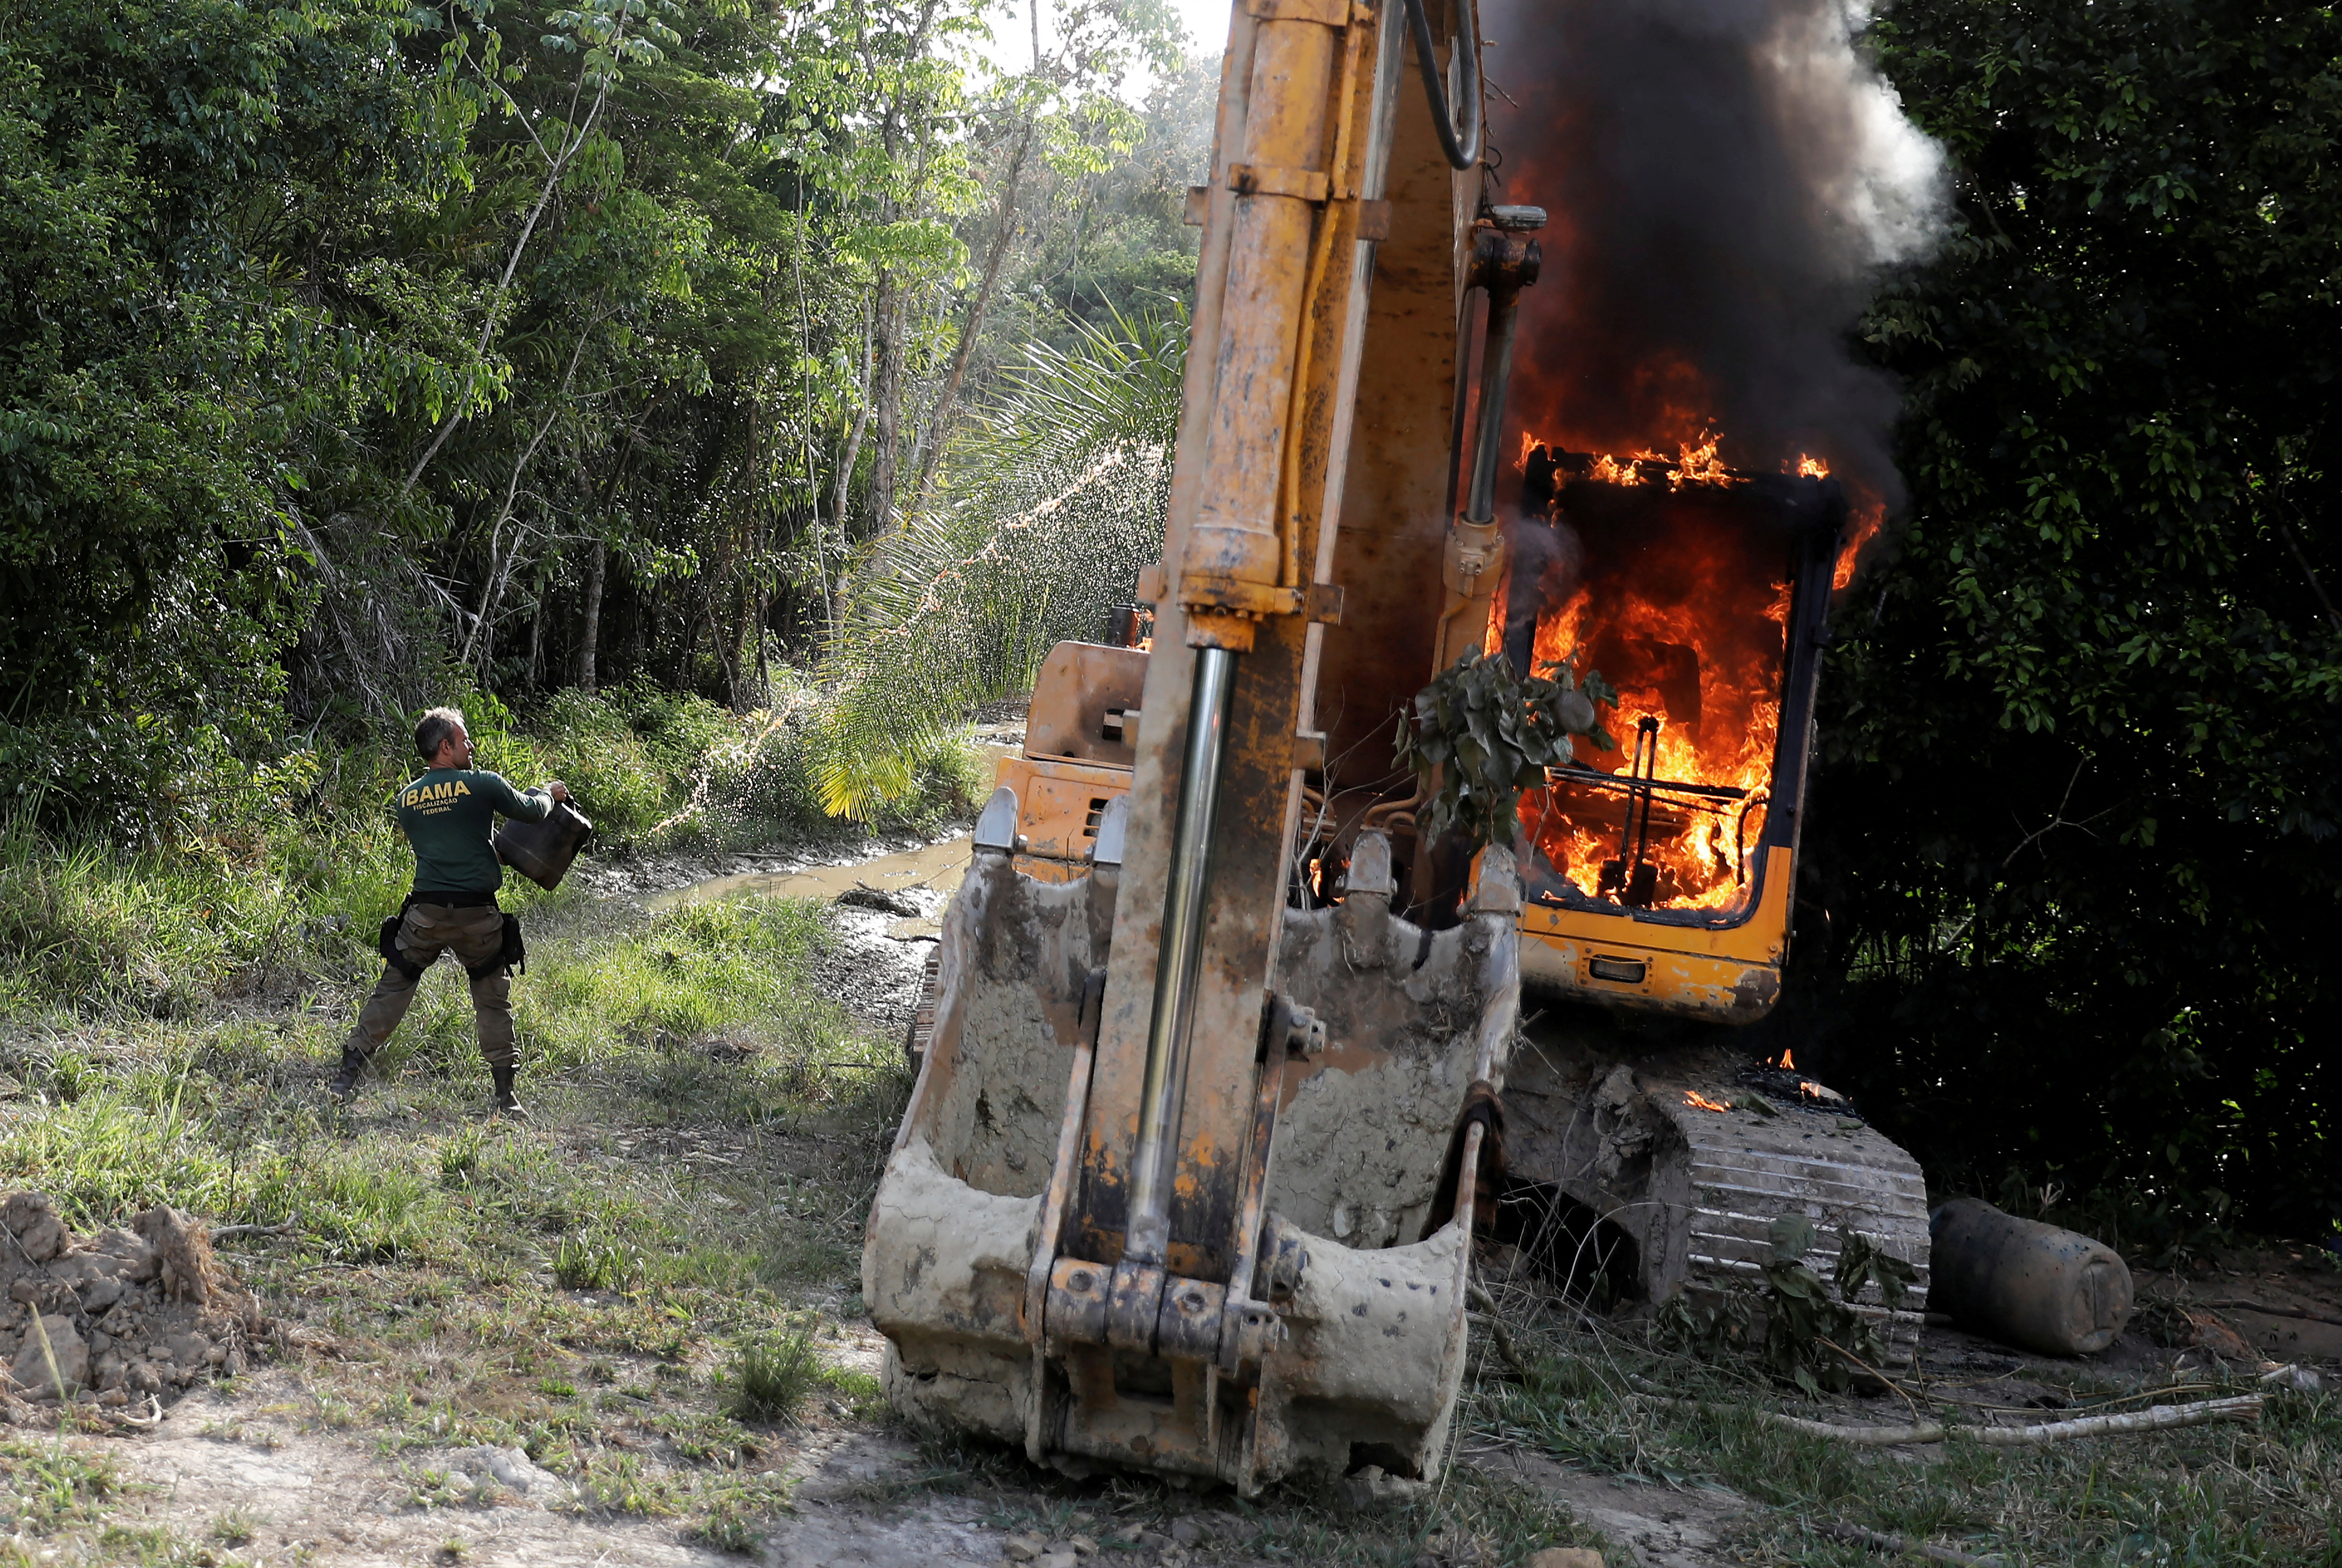 An agent of the Brazilian Institute for the Environment and Renewable Natural Resources (IBAMA) throws oil at a machine to destroy it at an illegal gold mine during an operation conducted jointly with the Federal Police near the city of Altamir